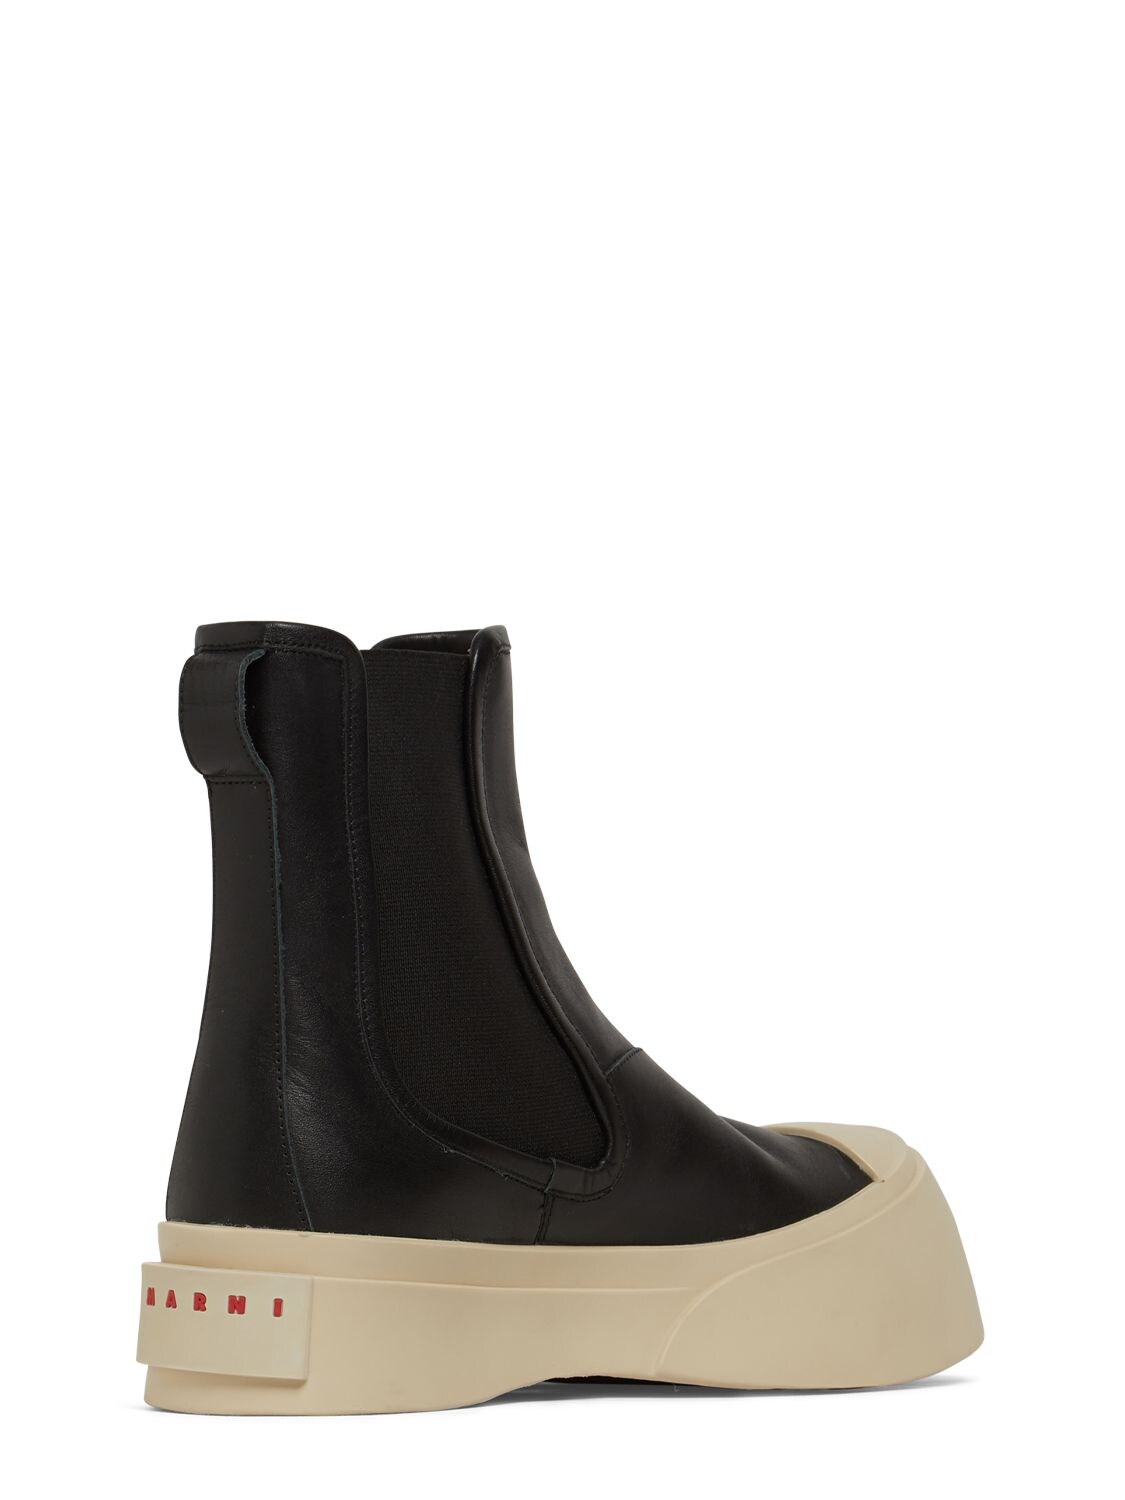 Marni 20mm Pablo Leather Chelsea Boots In Black | ModeSens